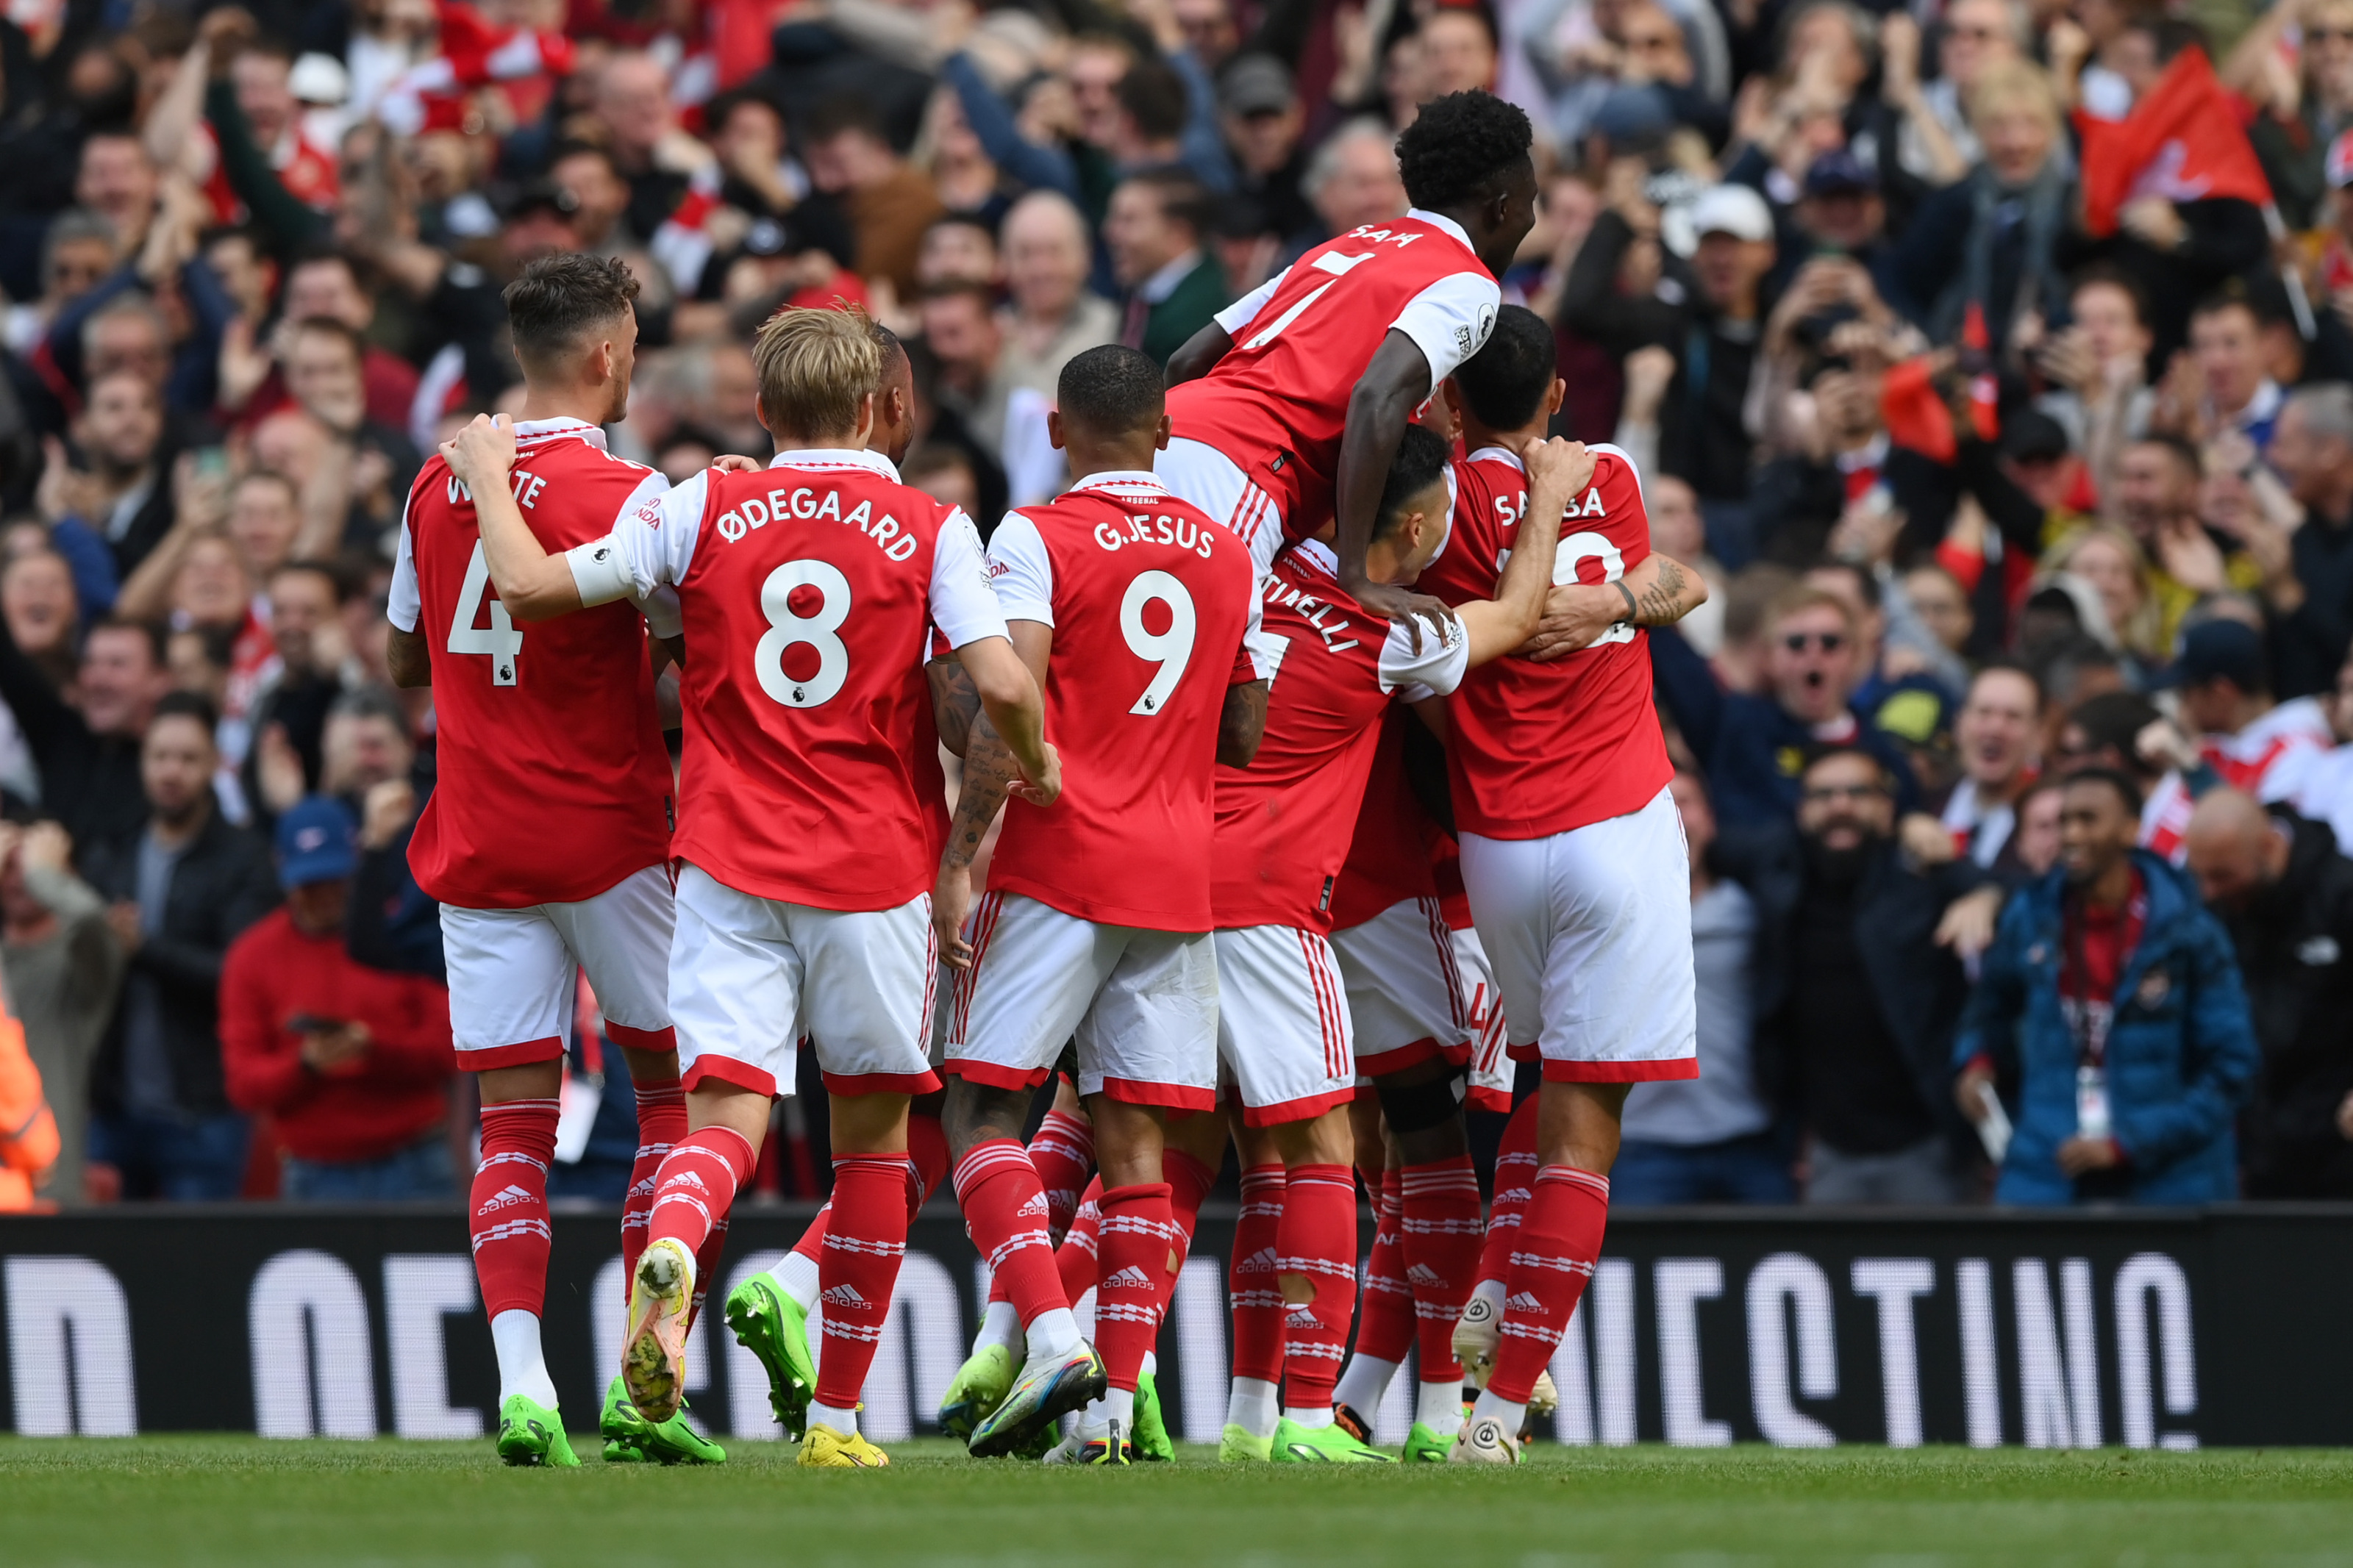 Arsenal 3-1 Tottenham Player Ratings as Gunners Claim Derby Victory